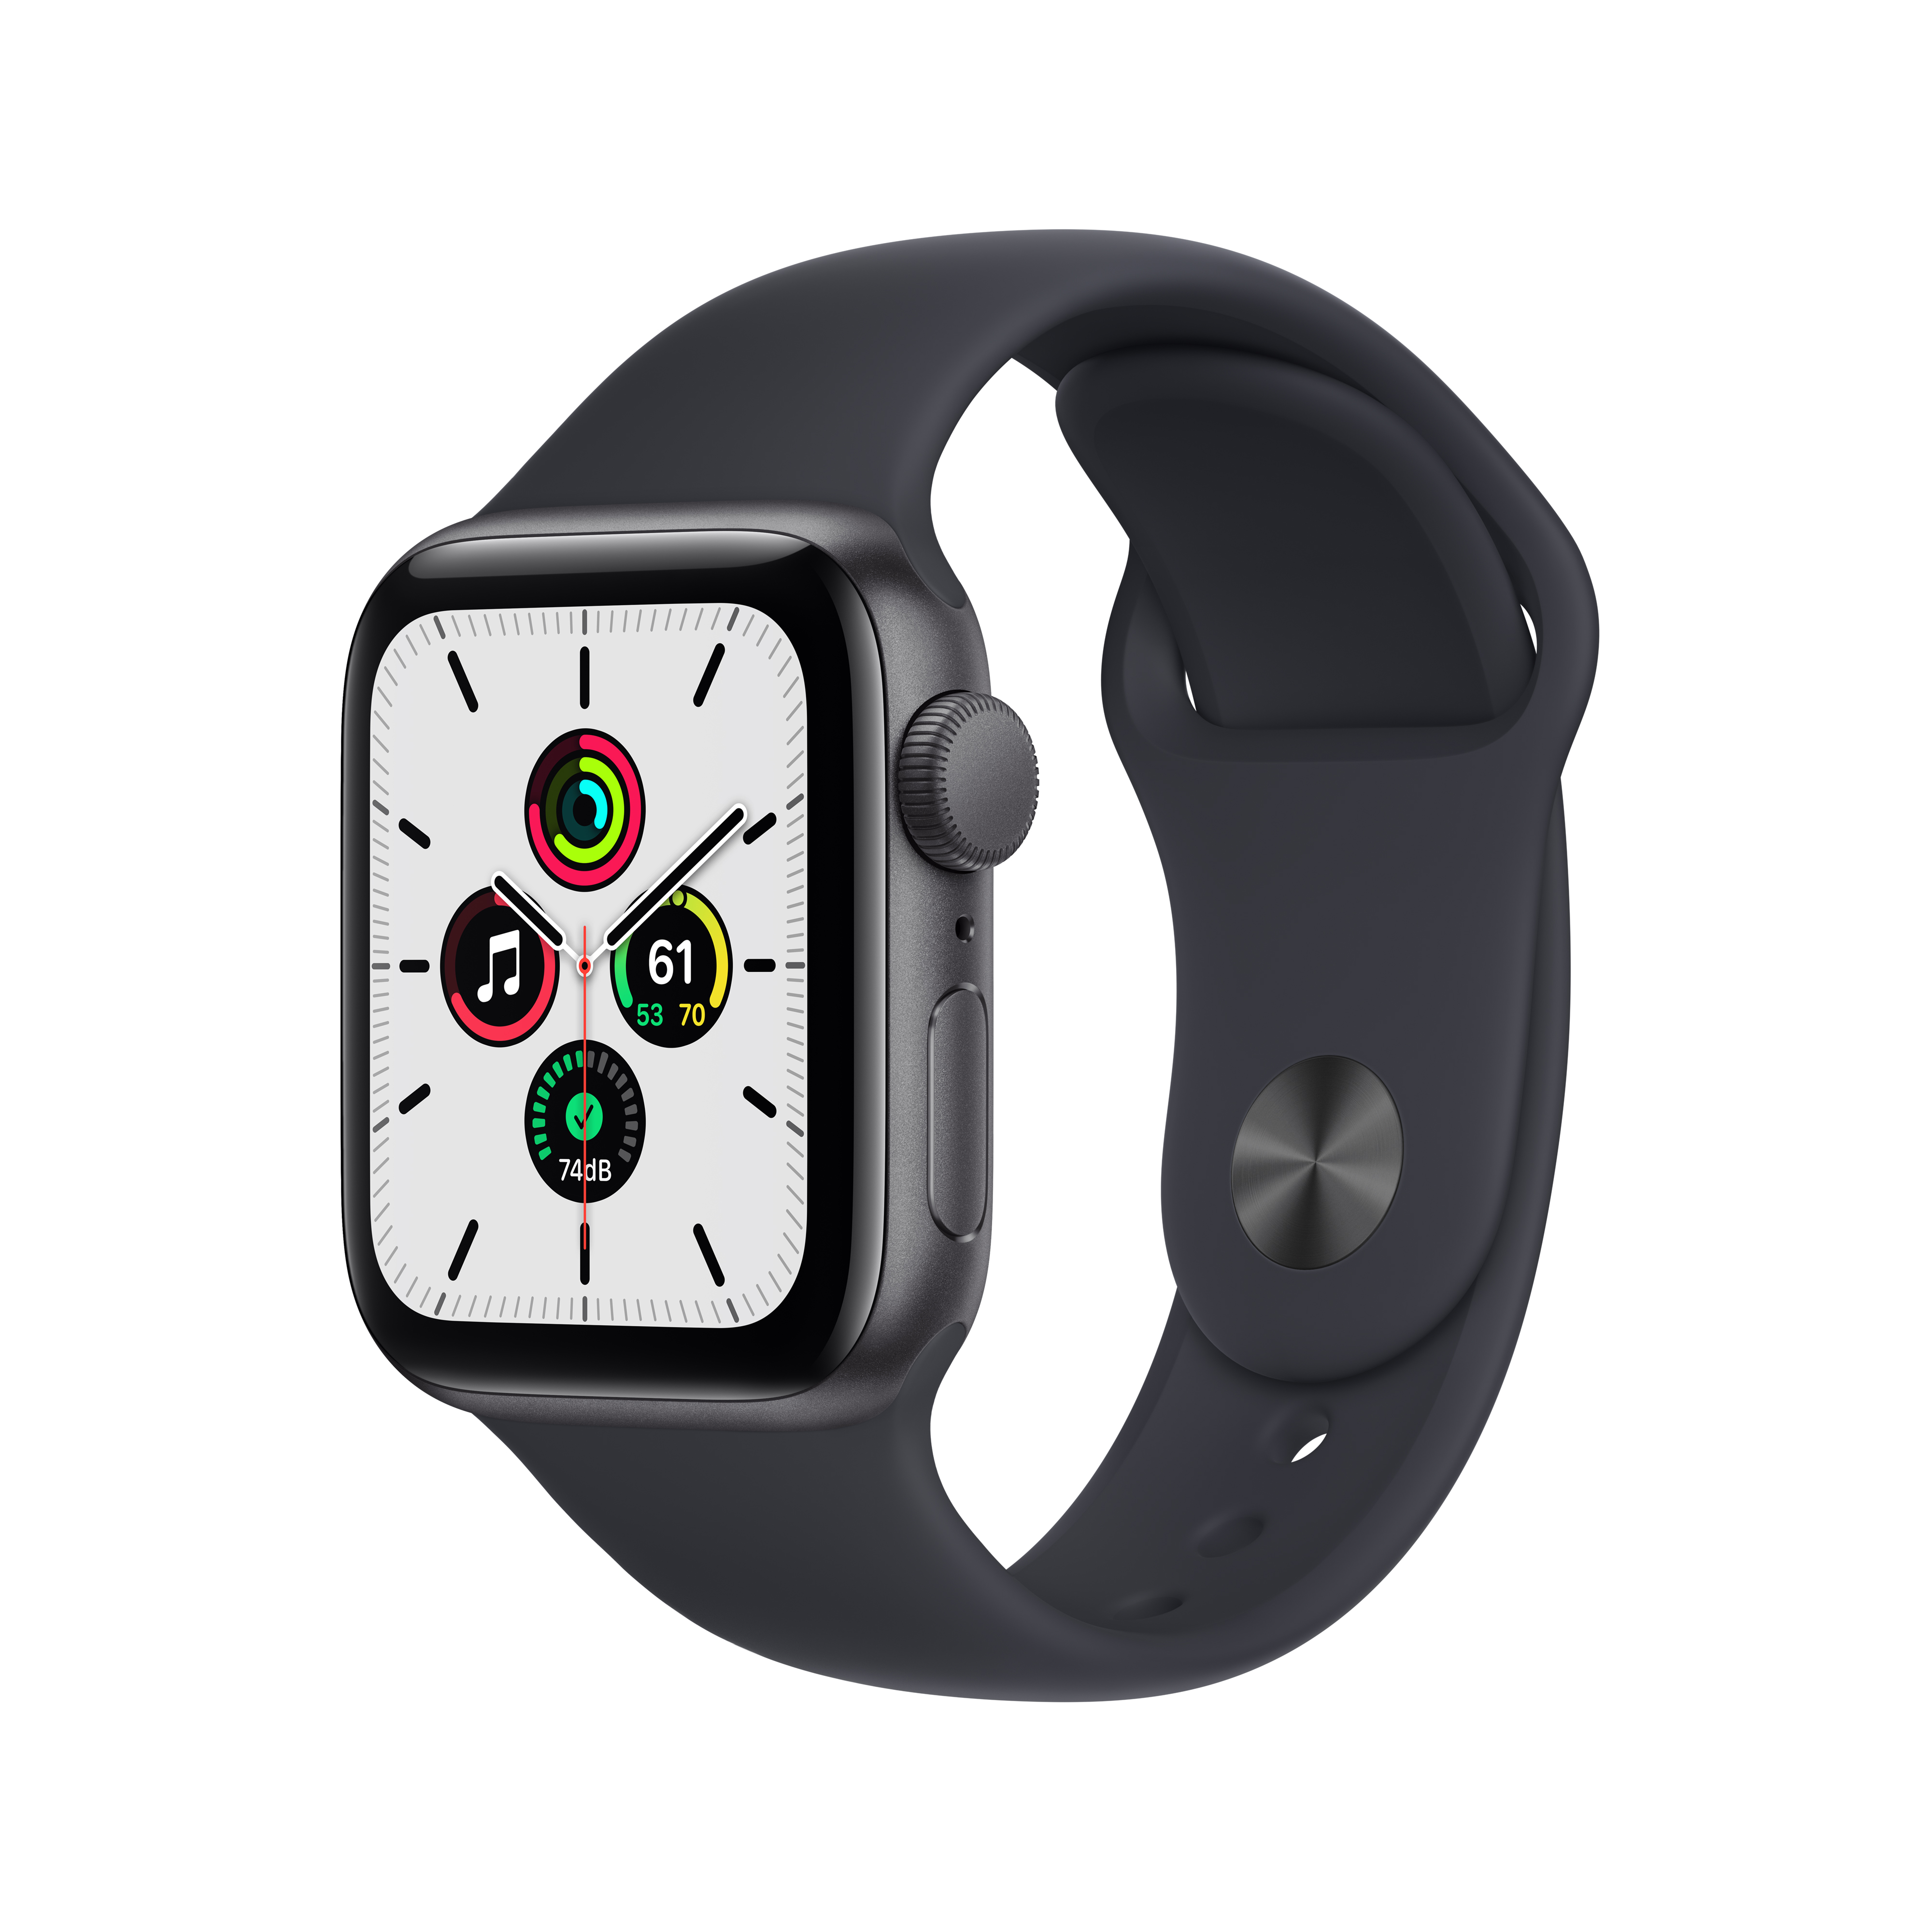 Apple Watch SE (1st Gen) GPS, 40mm Space Gray Aluminum Case with Midnight Sport Band - Regular - image 1 of 9